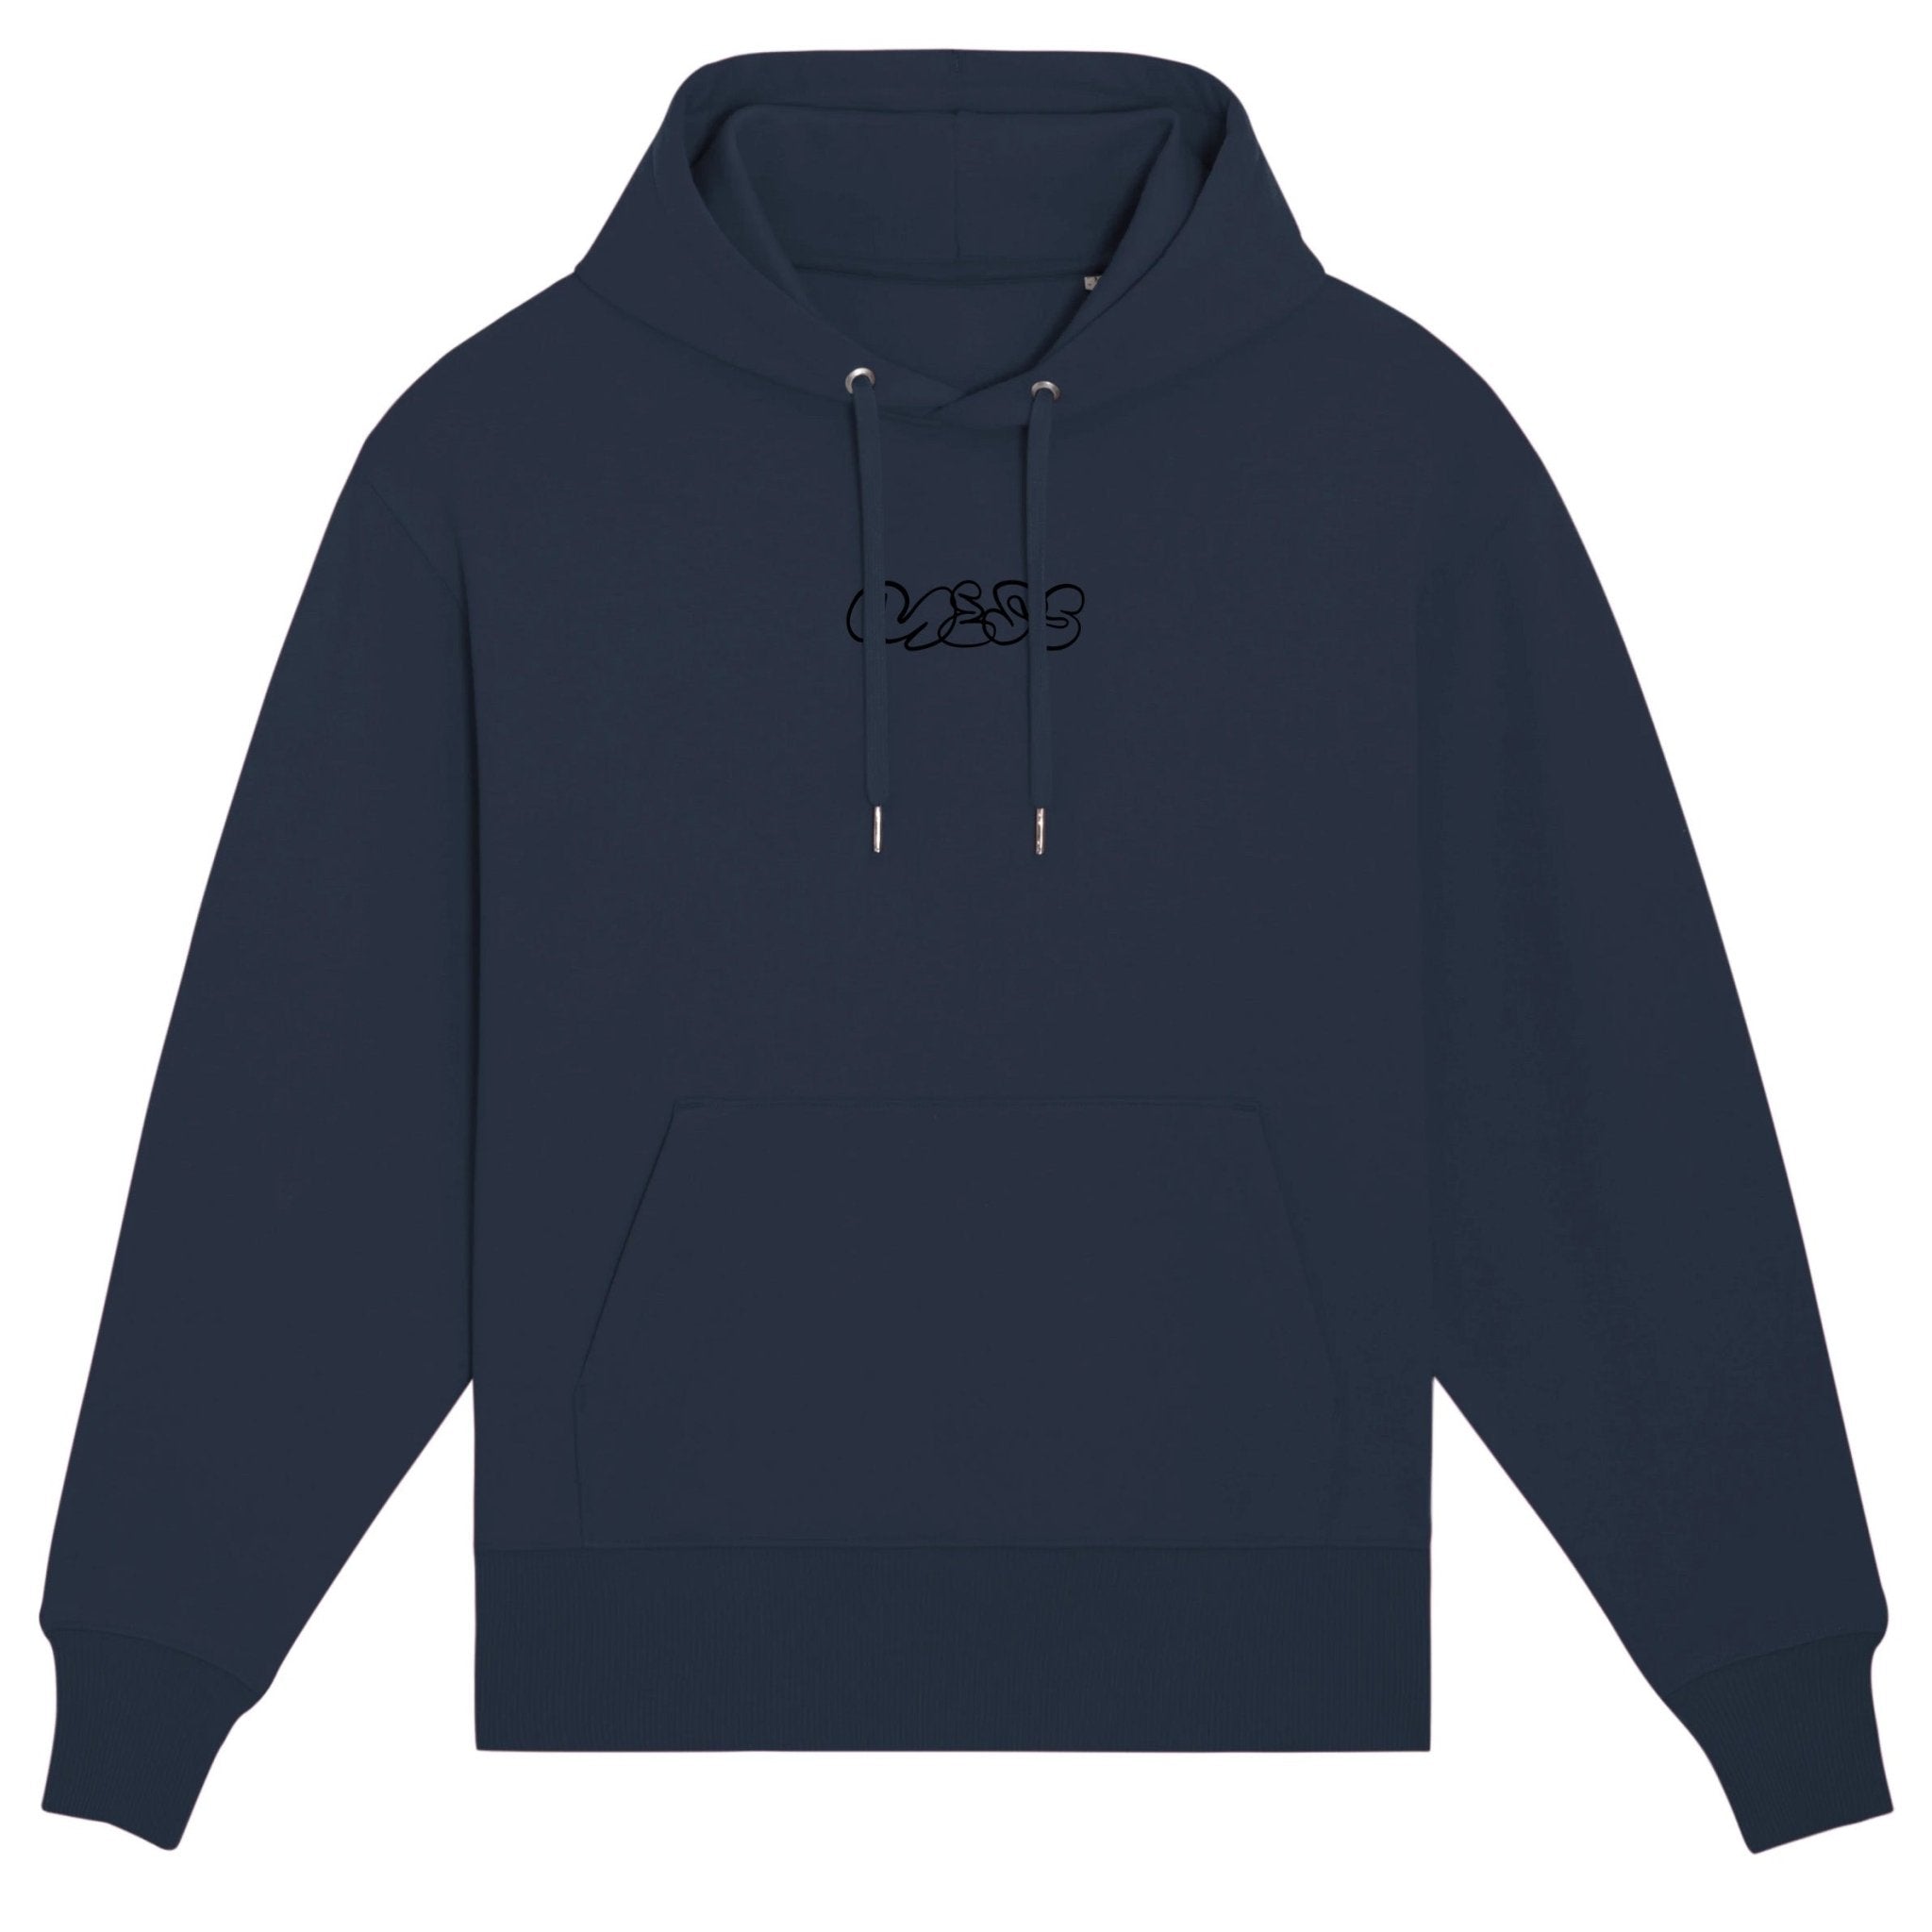 House of Mess: Oversized Hoodie - Moon Soldier